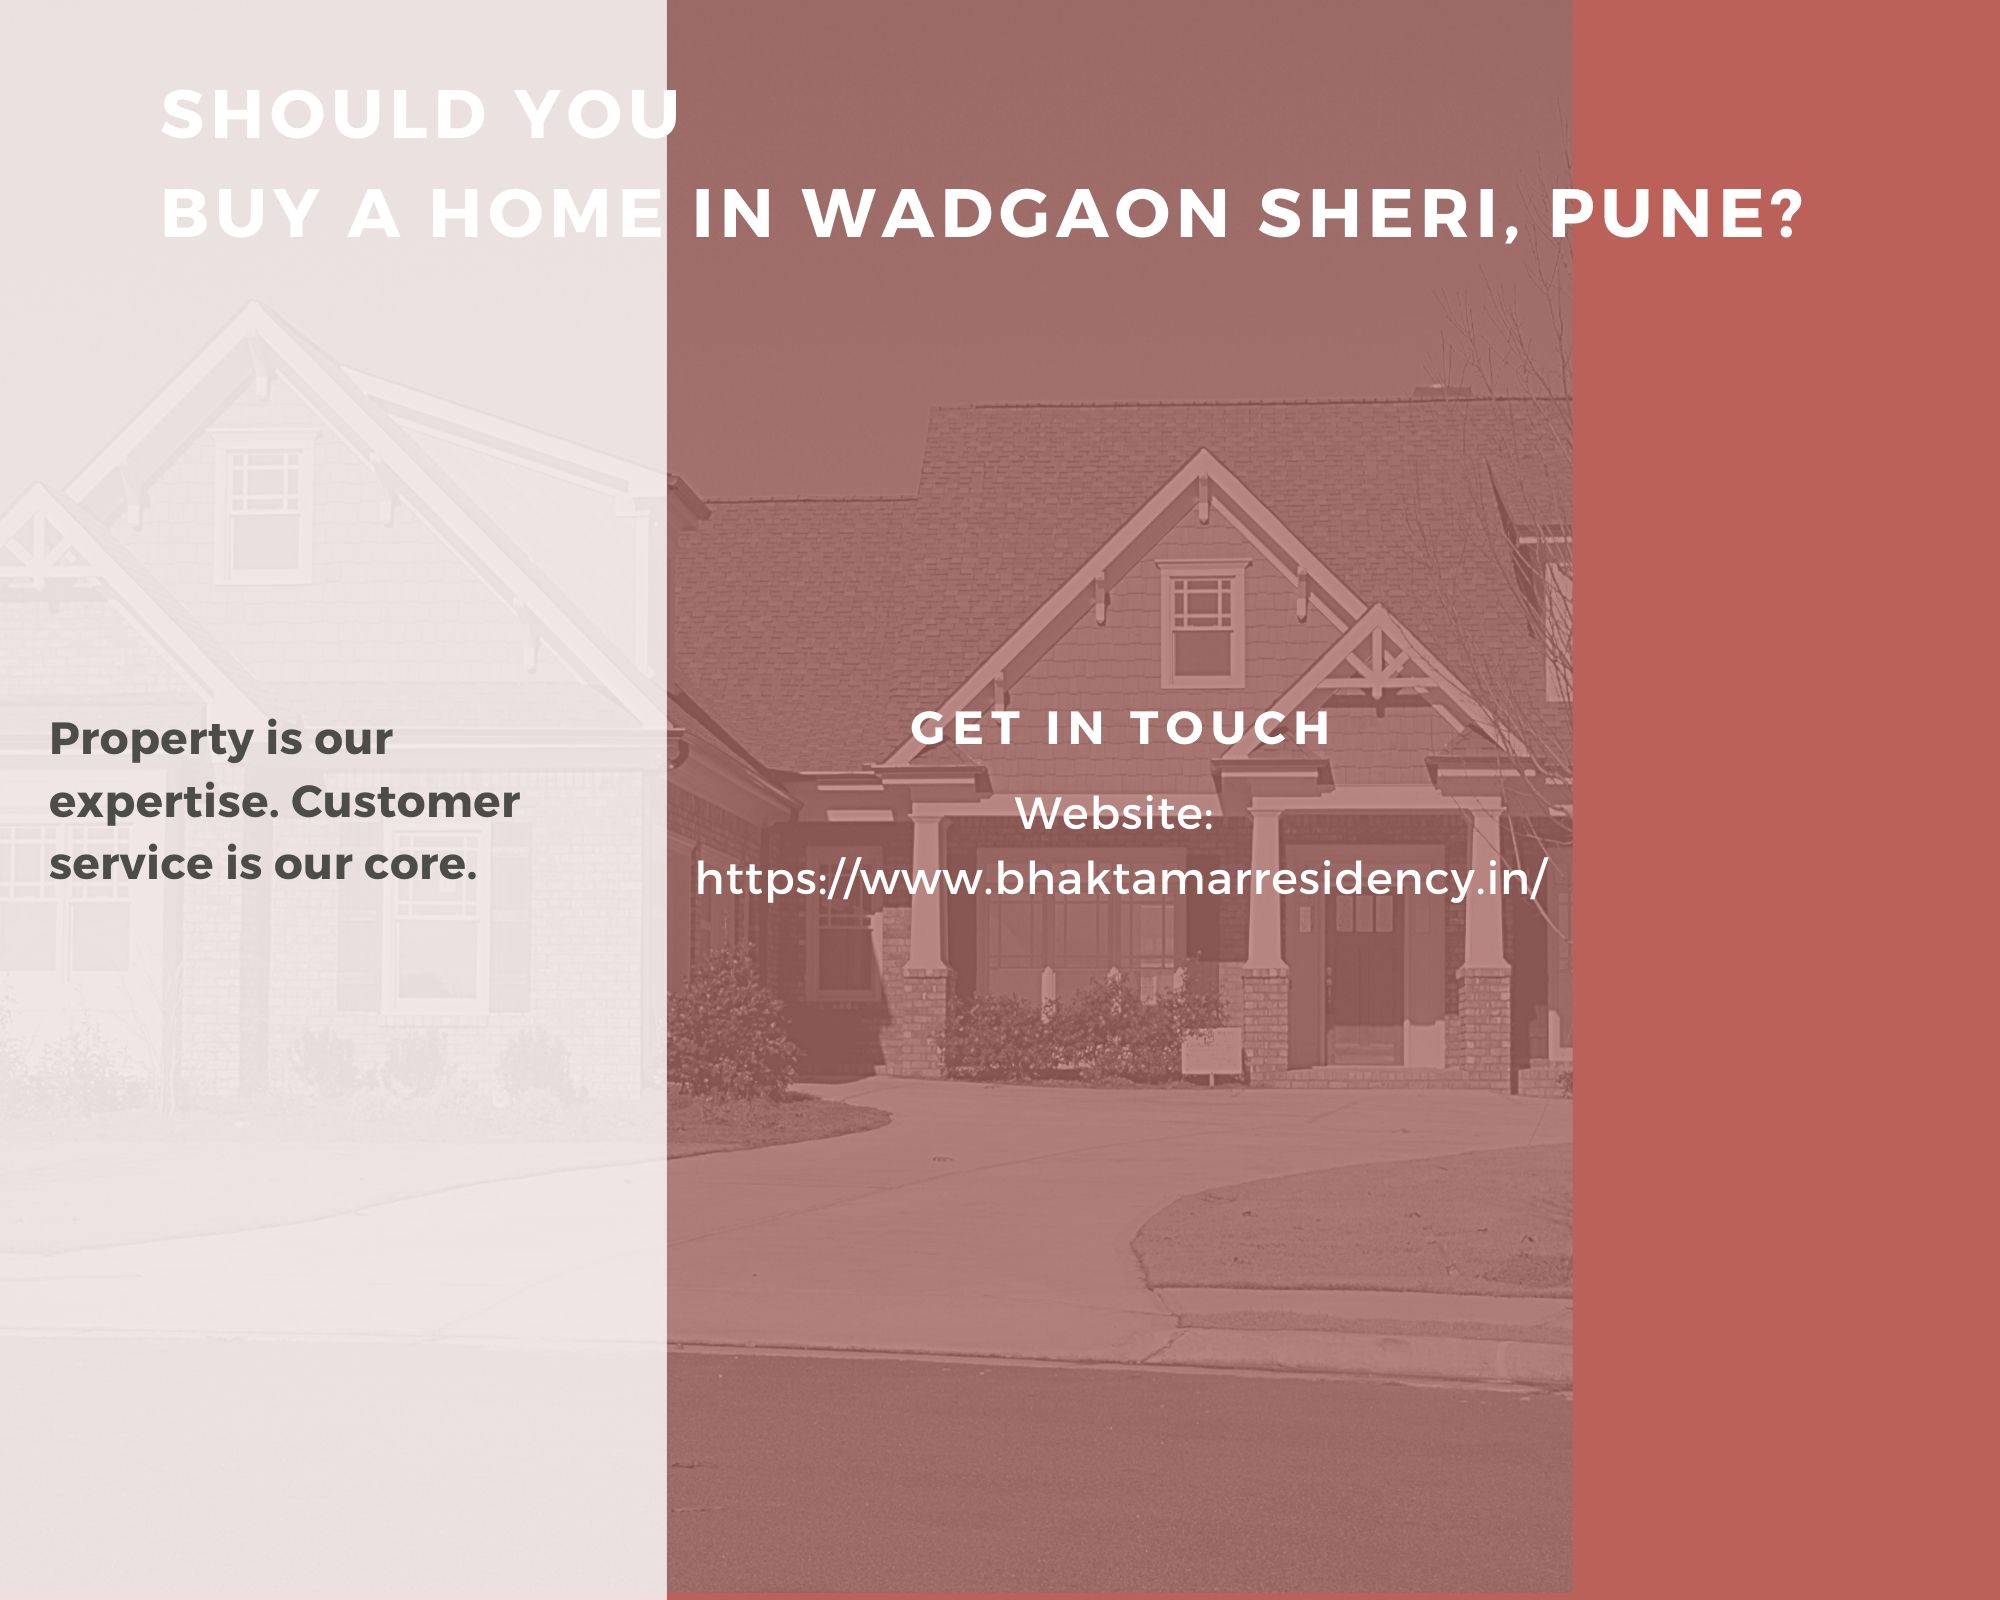 Should you buy a home in Wadgaon Sheri, Pune?